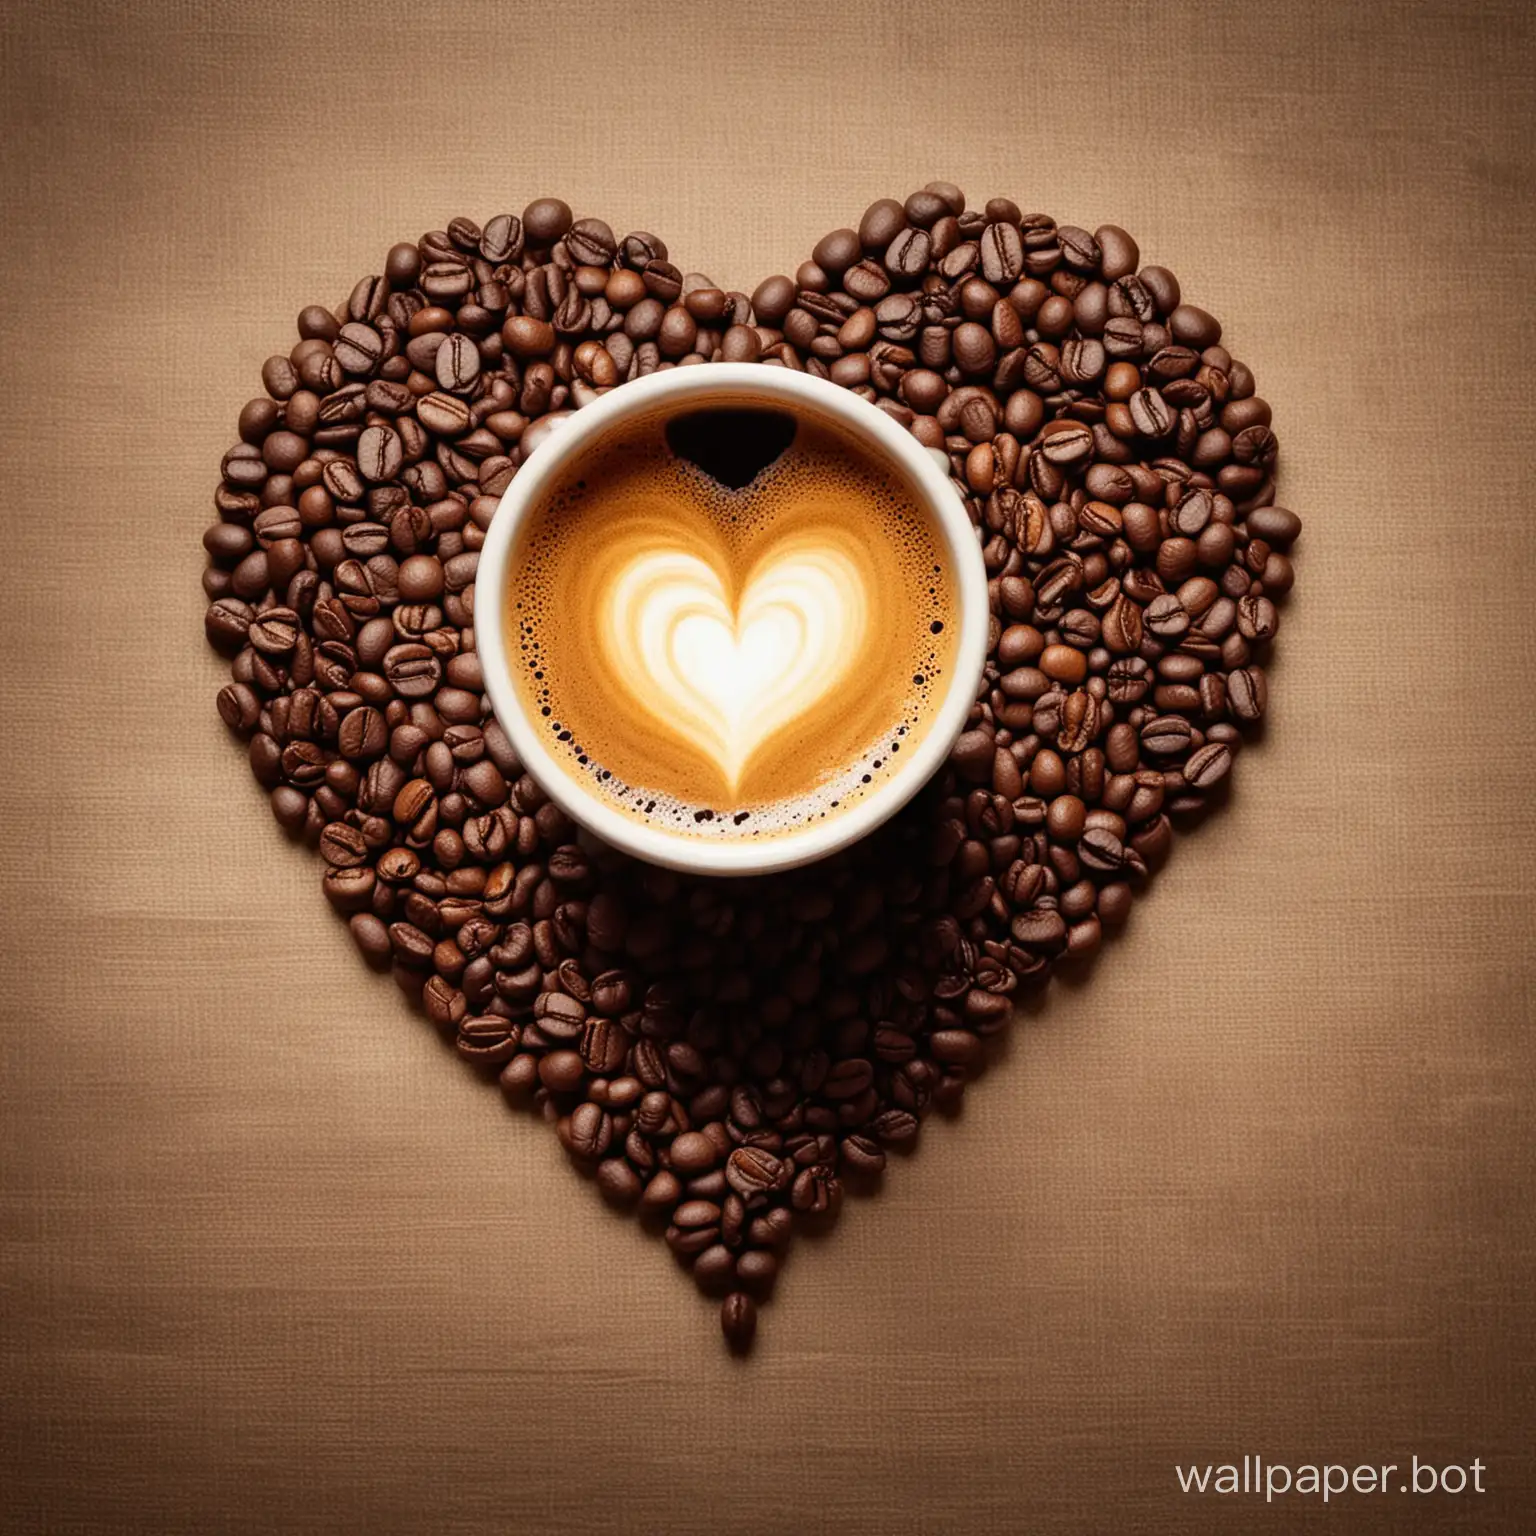 A cup of coffee with a rich aroma, lingering in my heart, coffee wants to be brown